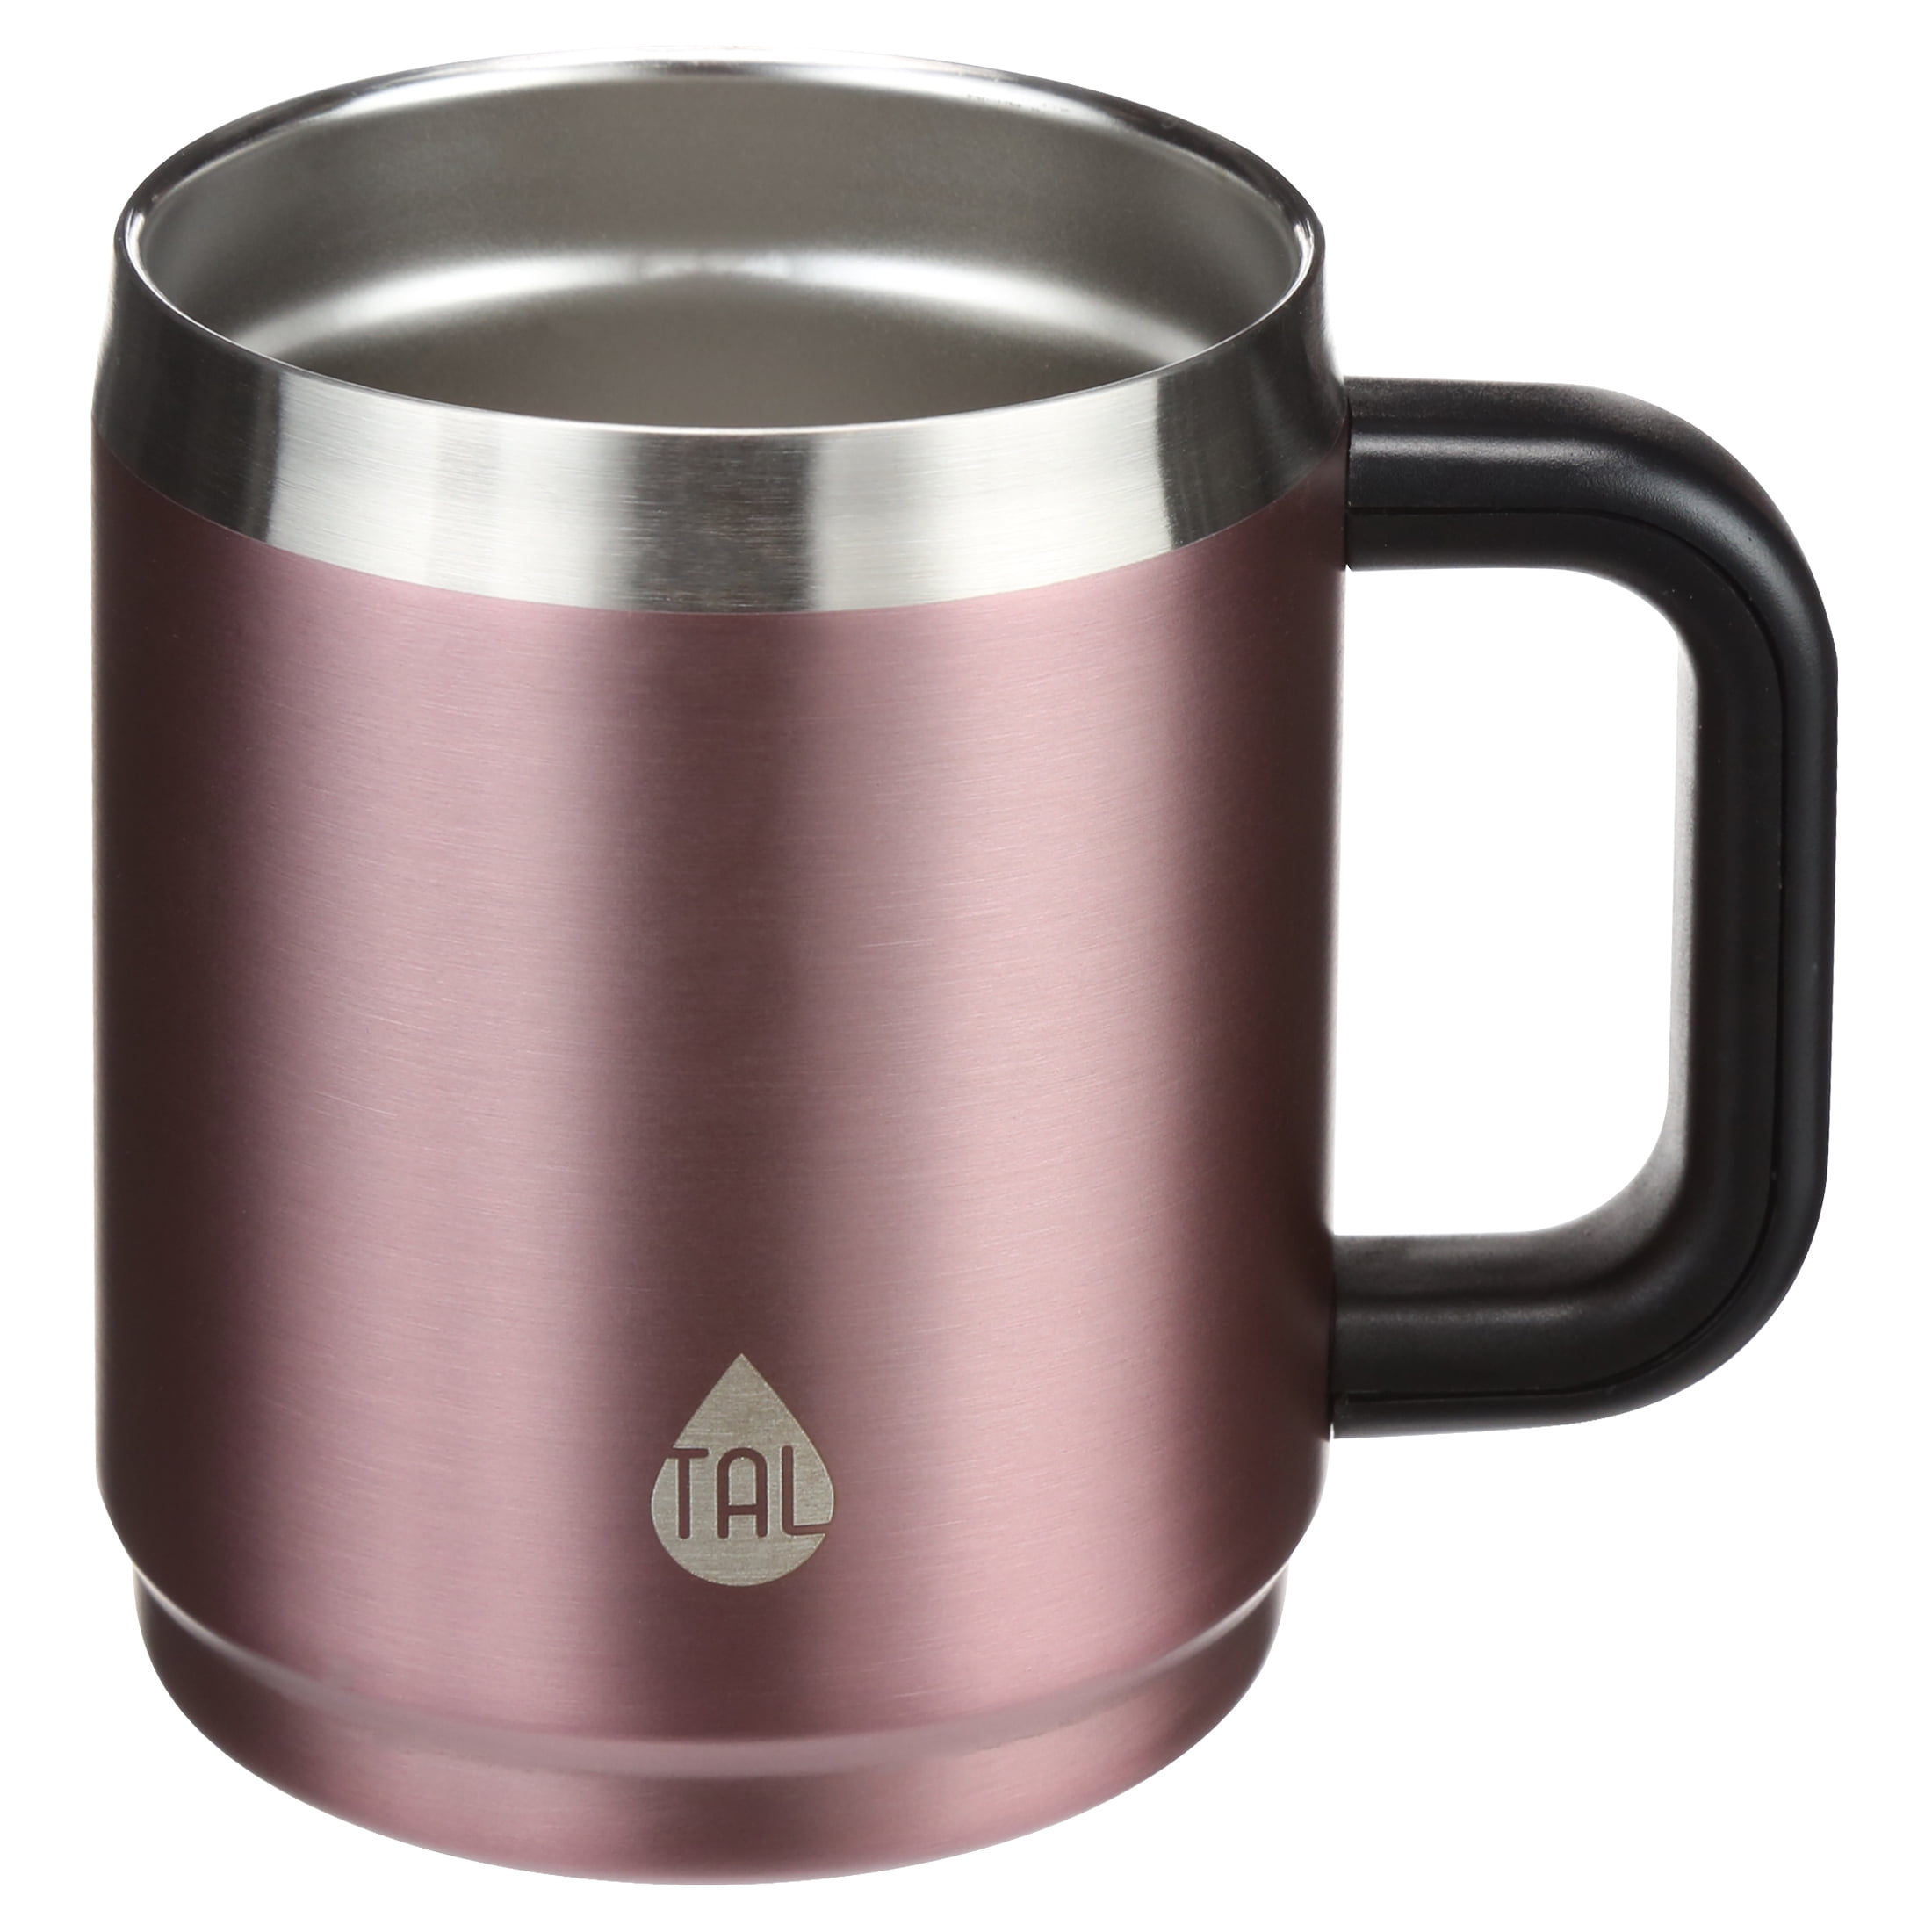 Stainless Steel Travel Mug – District Taco